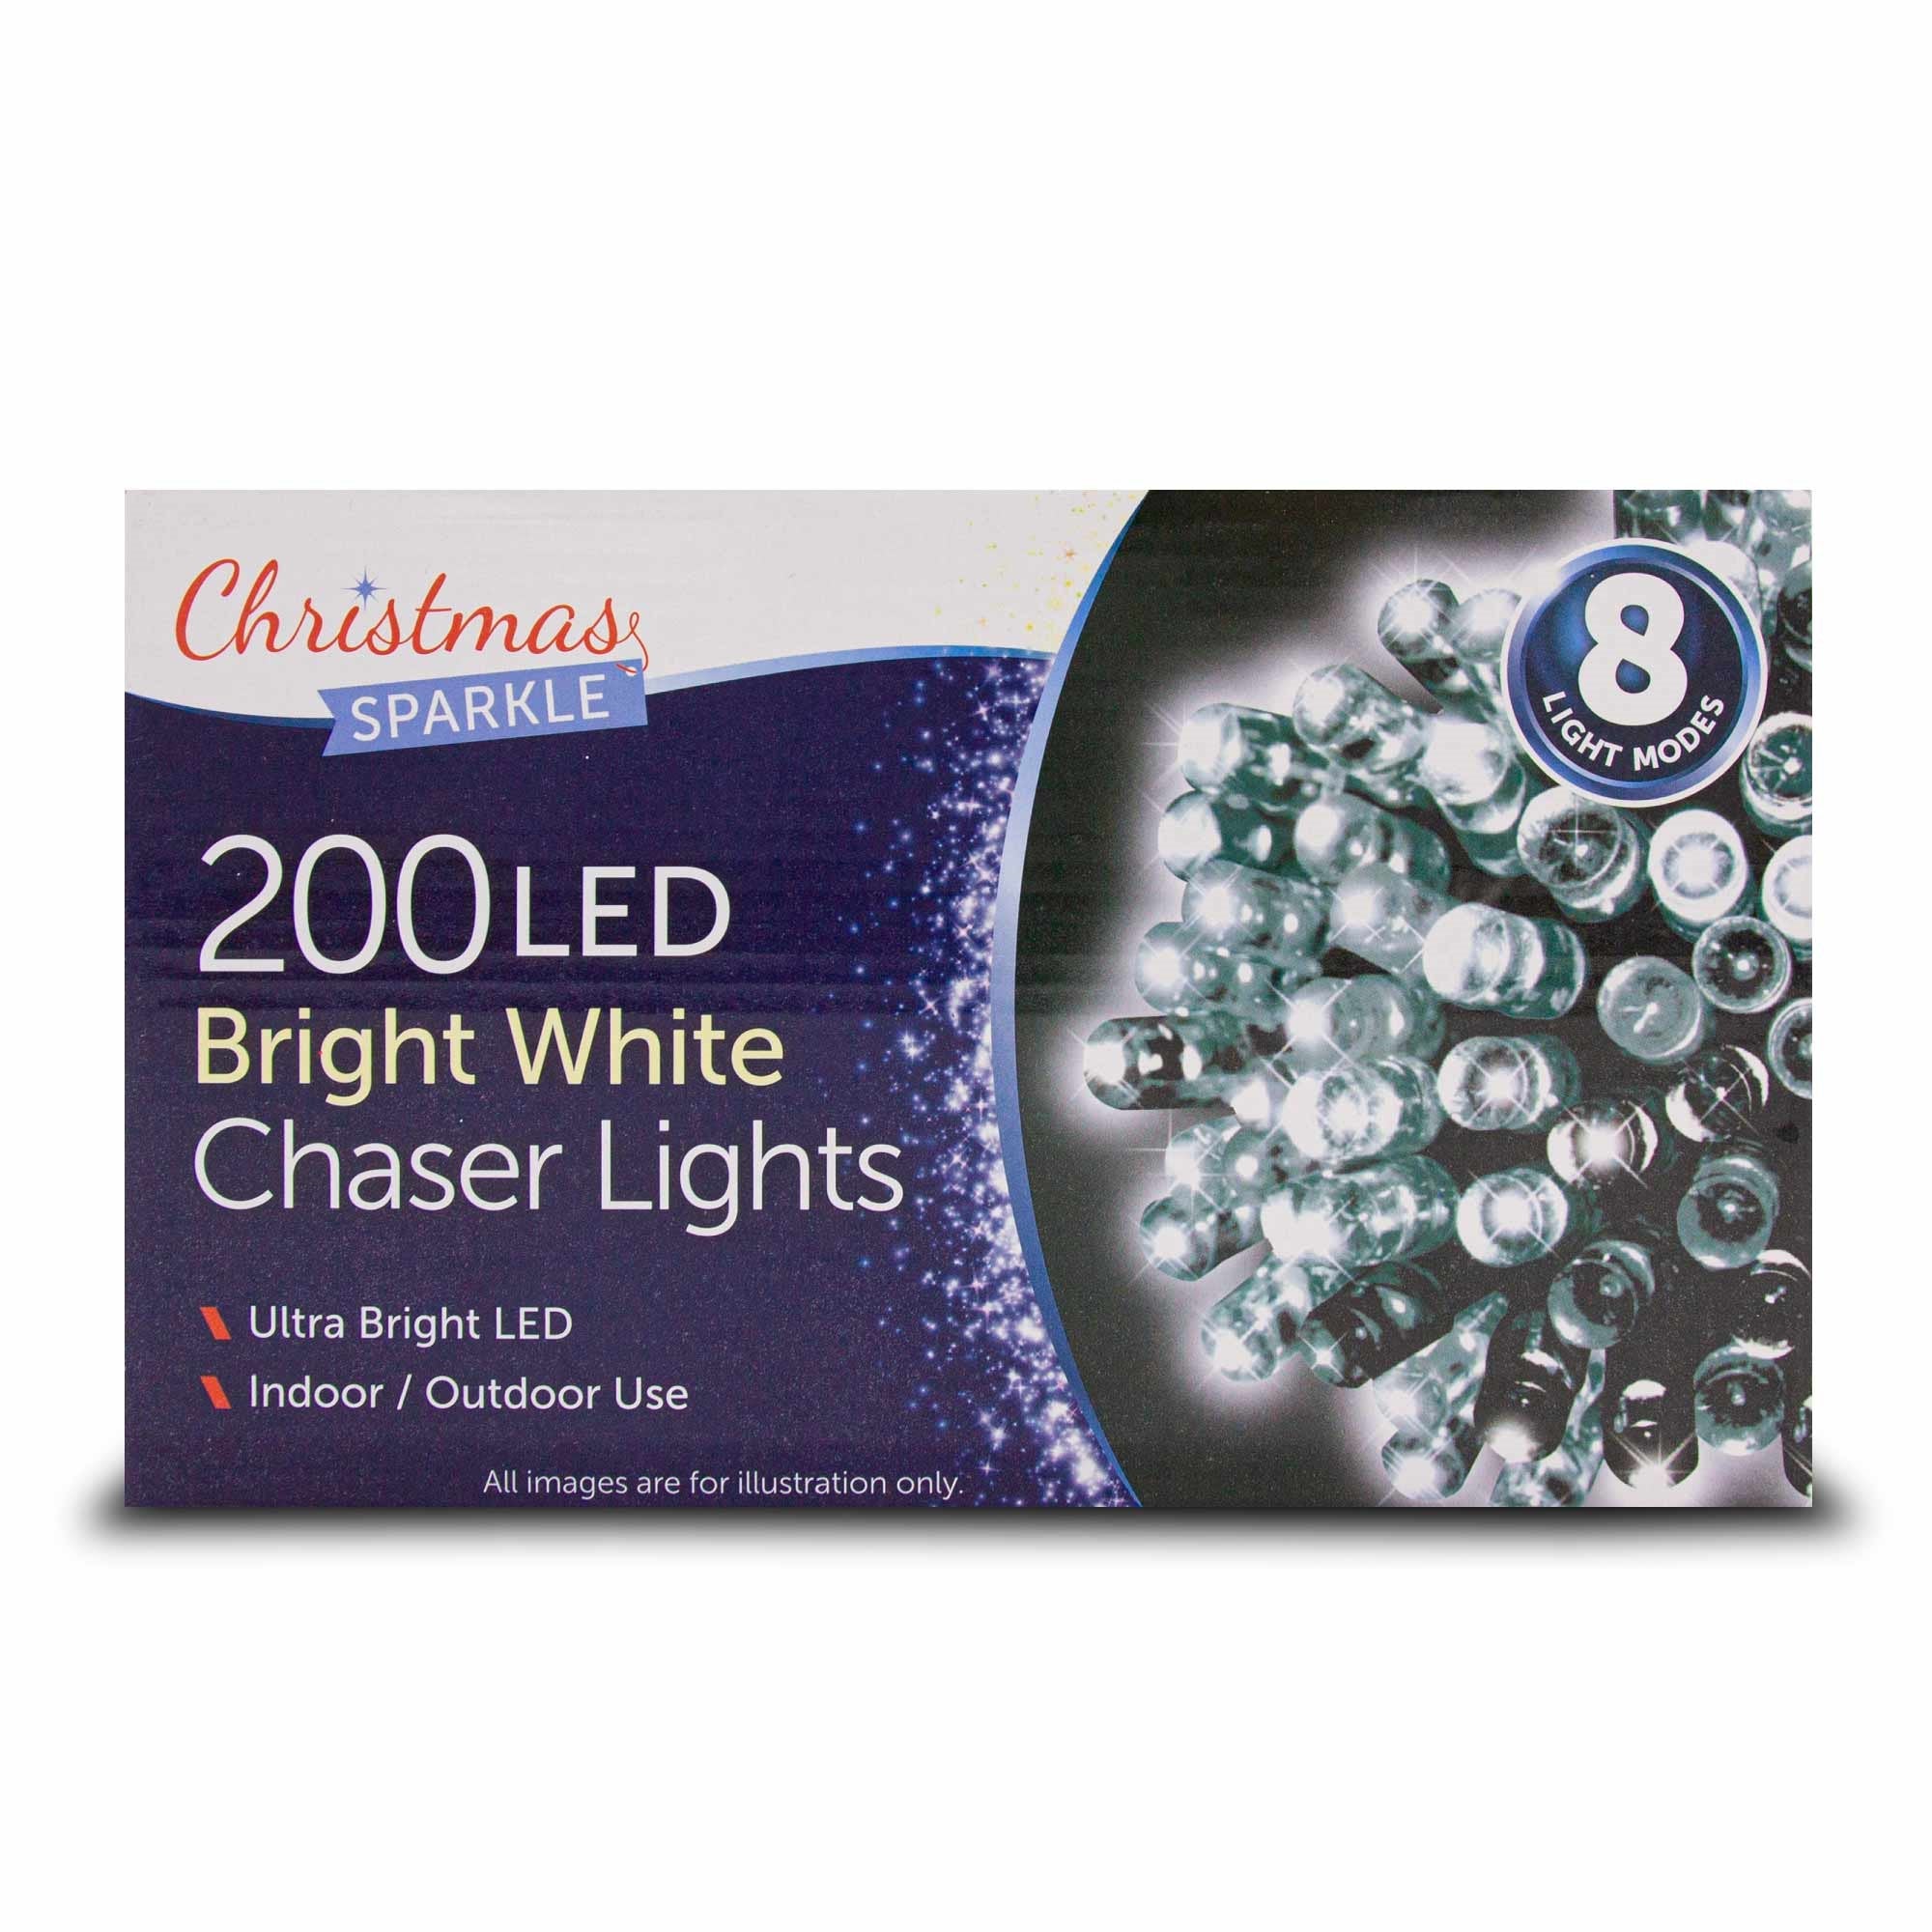 Christmas Sparkle Indoor and Outdoor Chaser Lights x 200 White LEDs - Mains Operated  | TJ Hughes